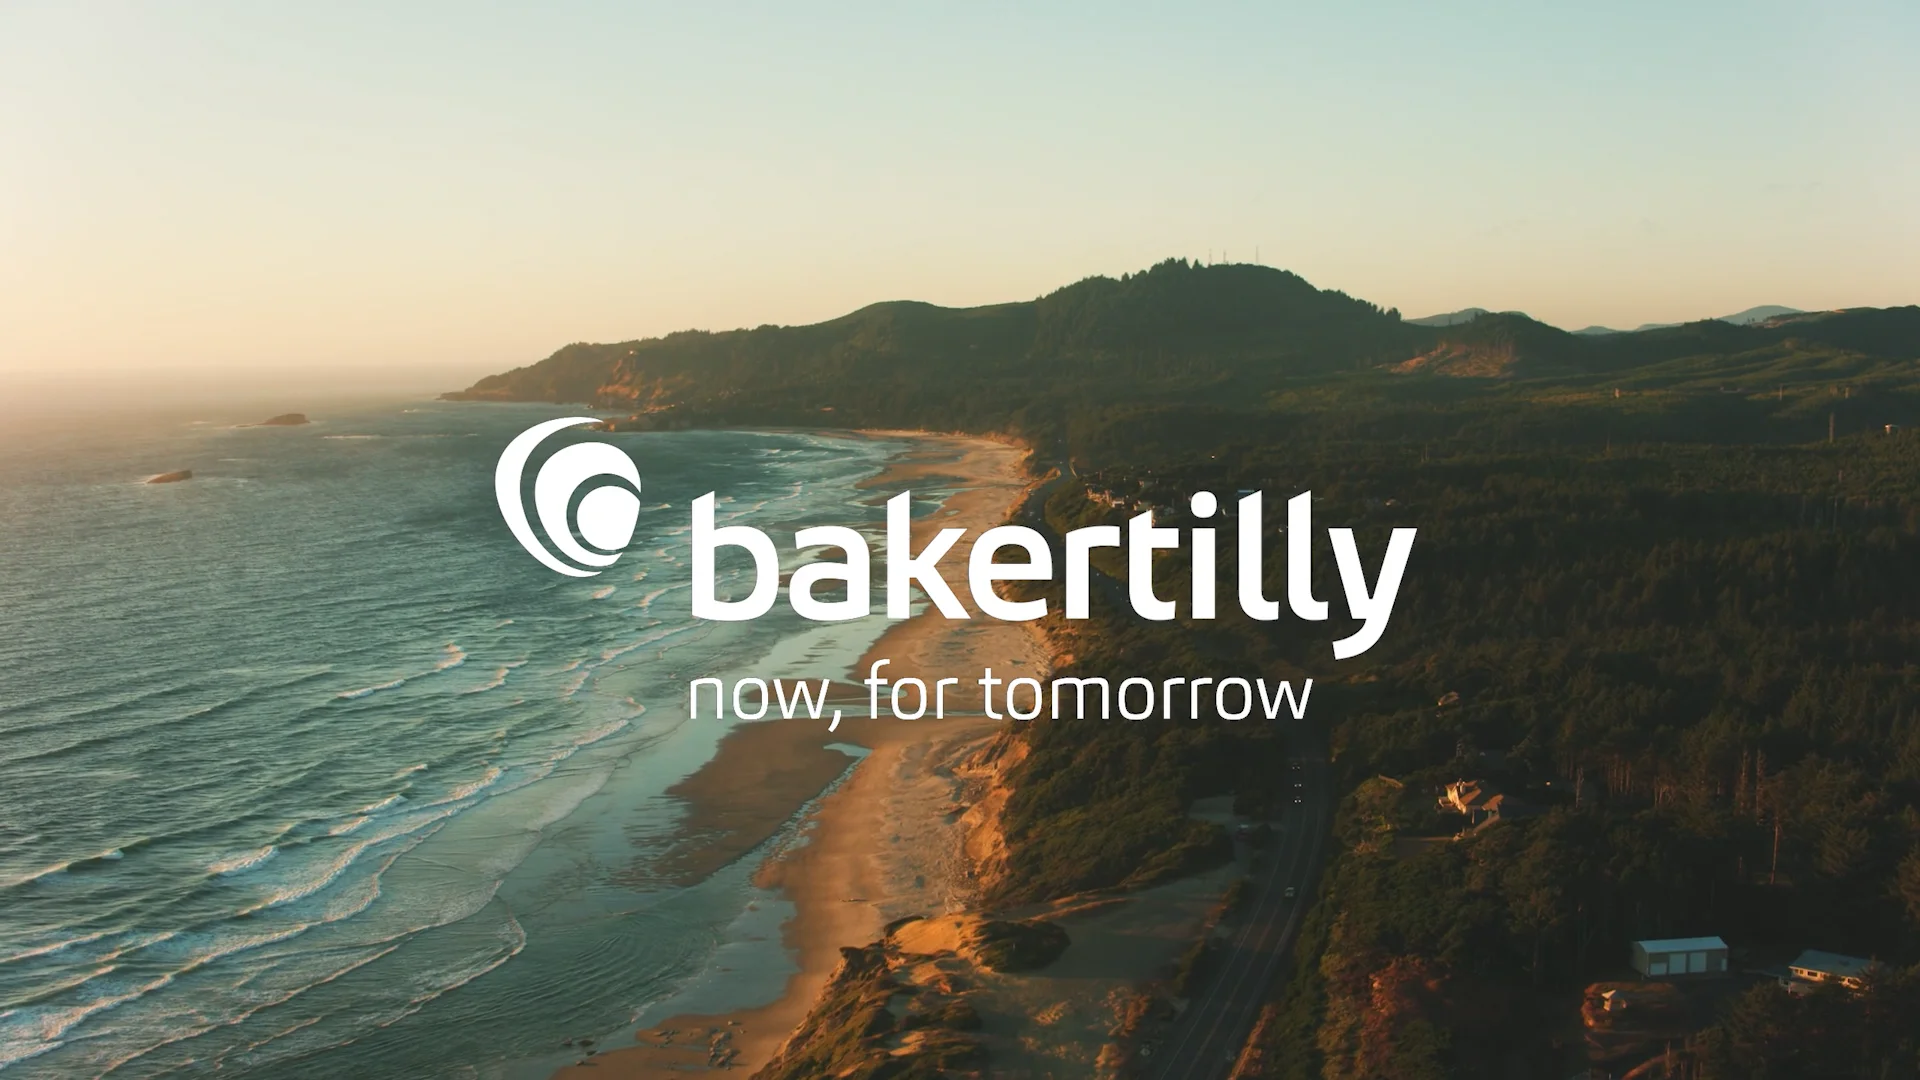 Baker Tilly - Now, for tomorrow